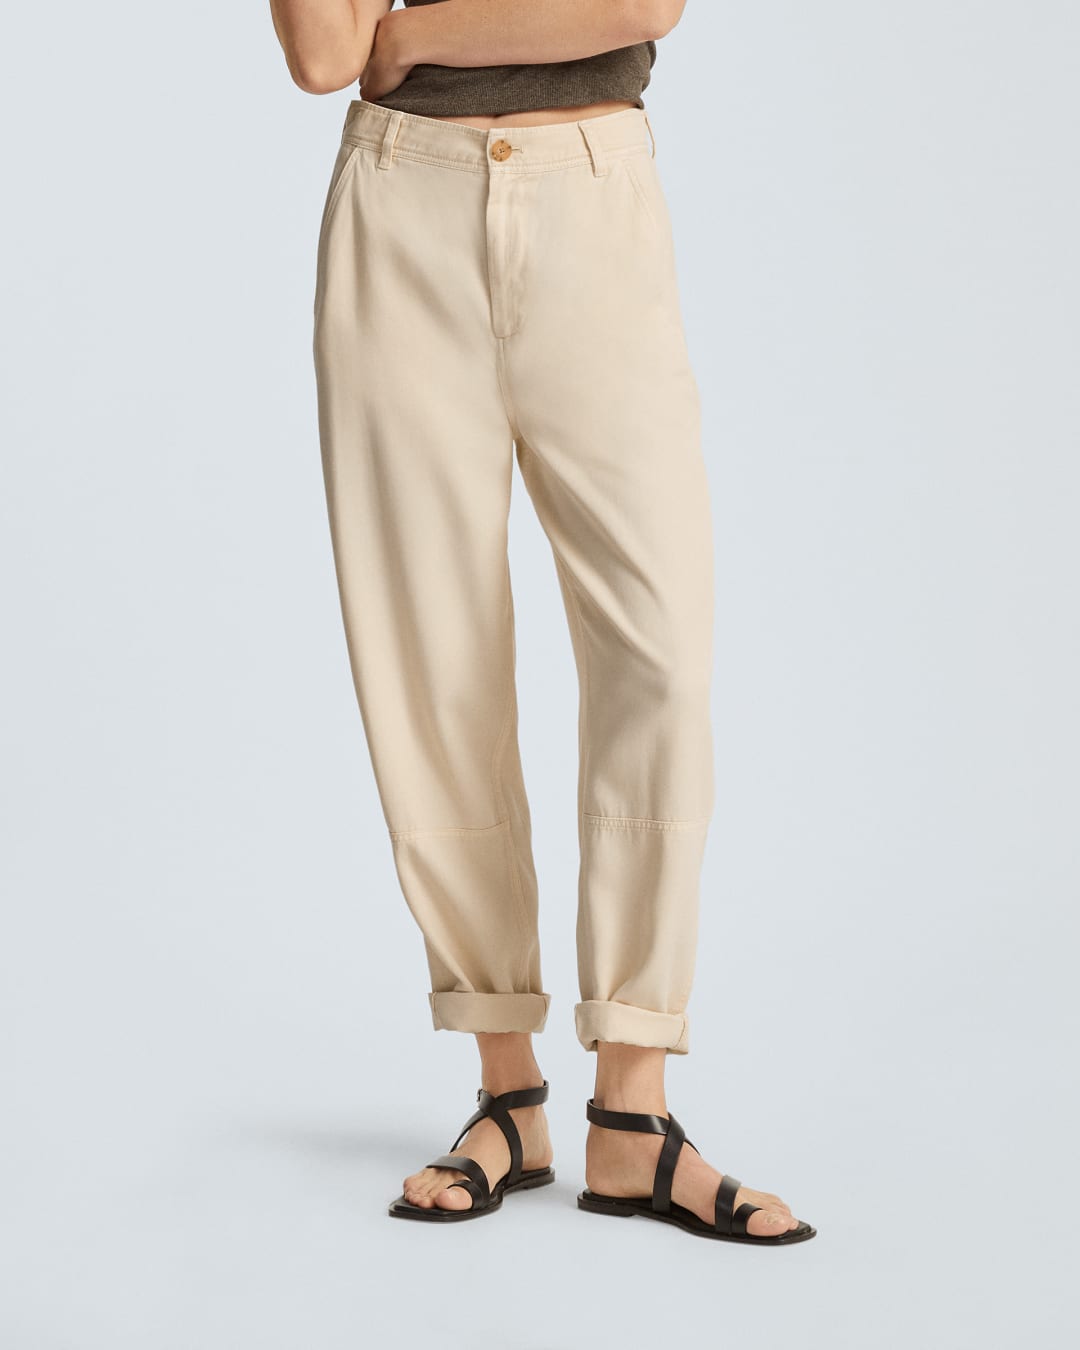 Everlane The Relaxed Chino